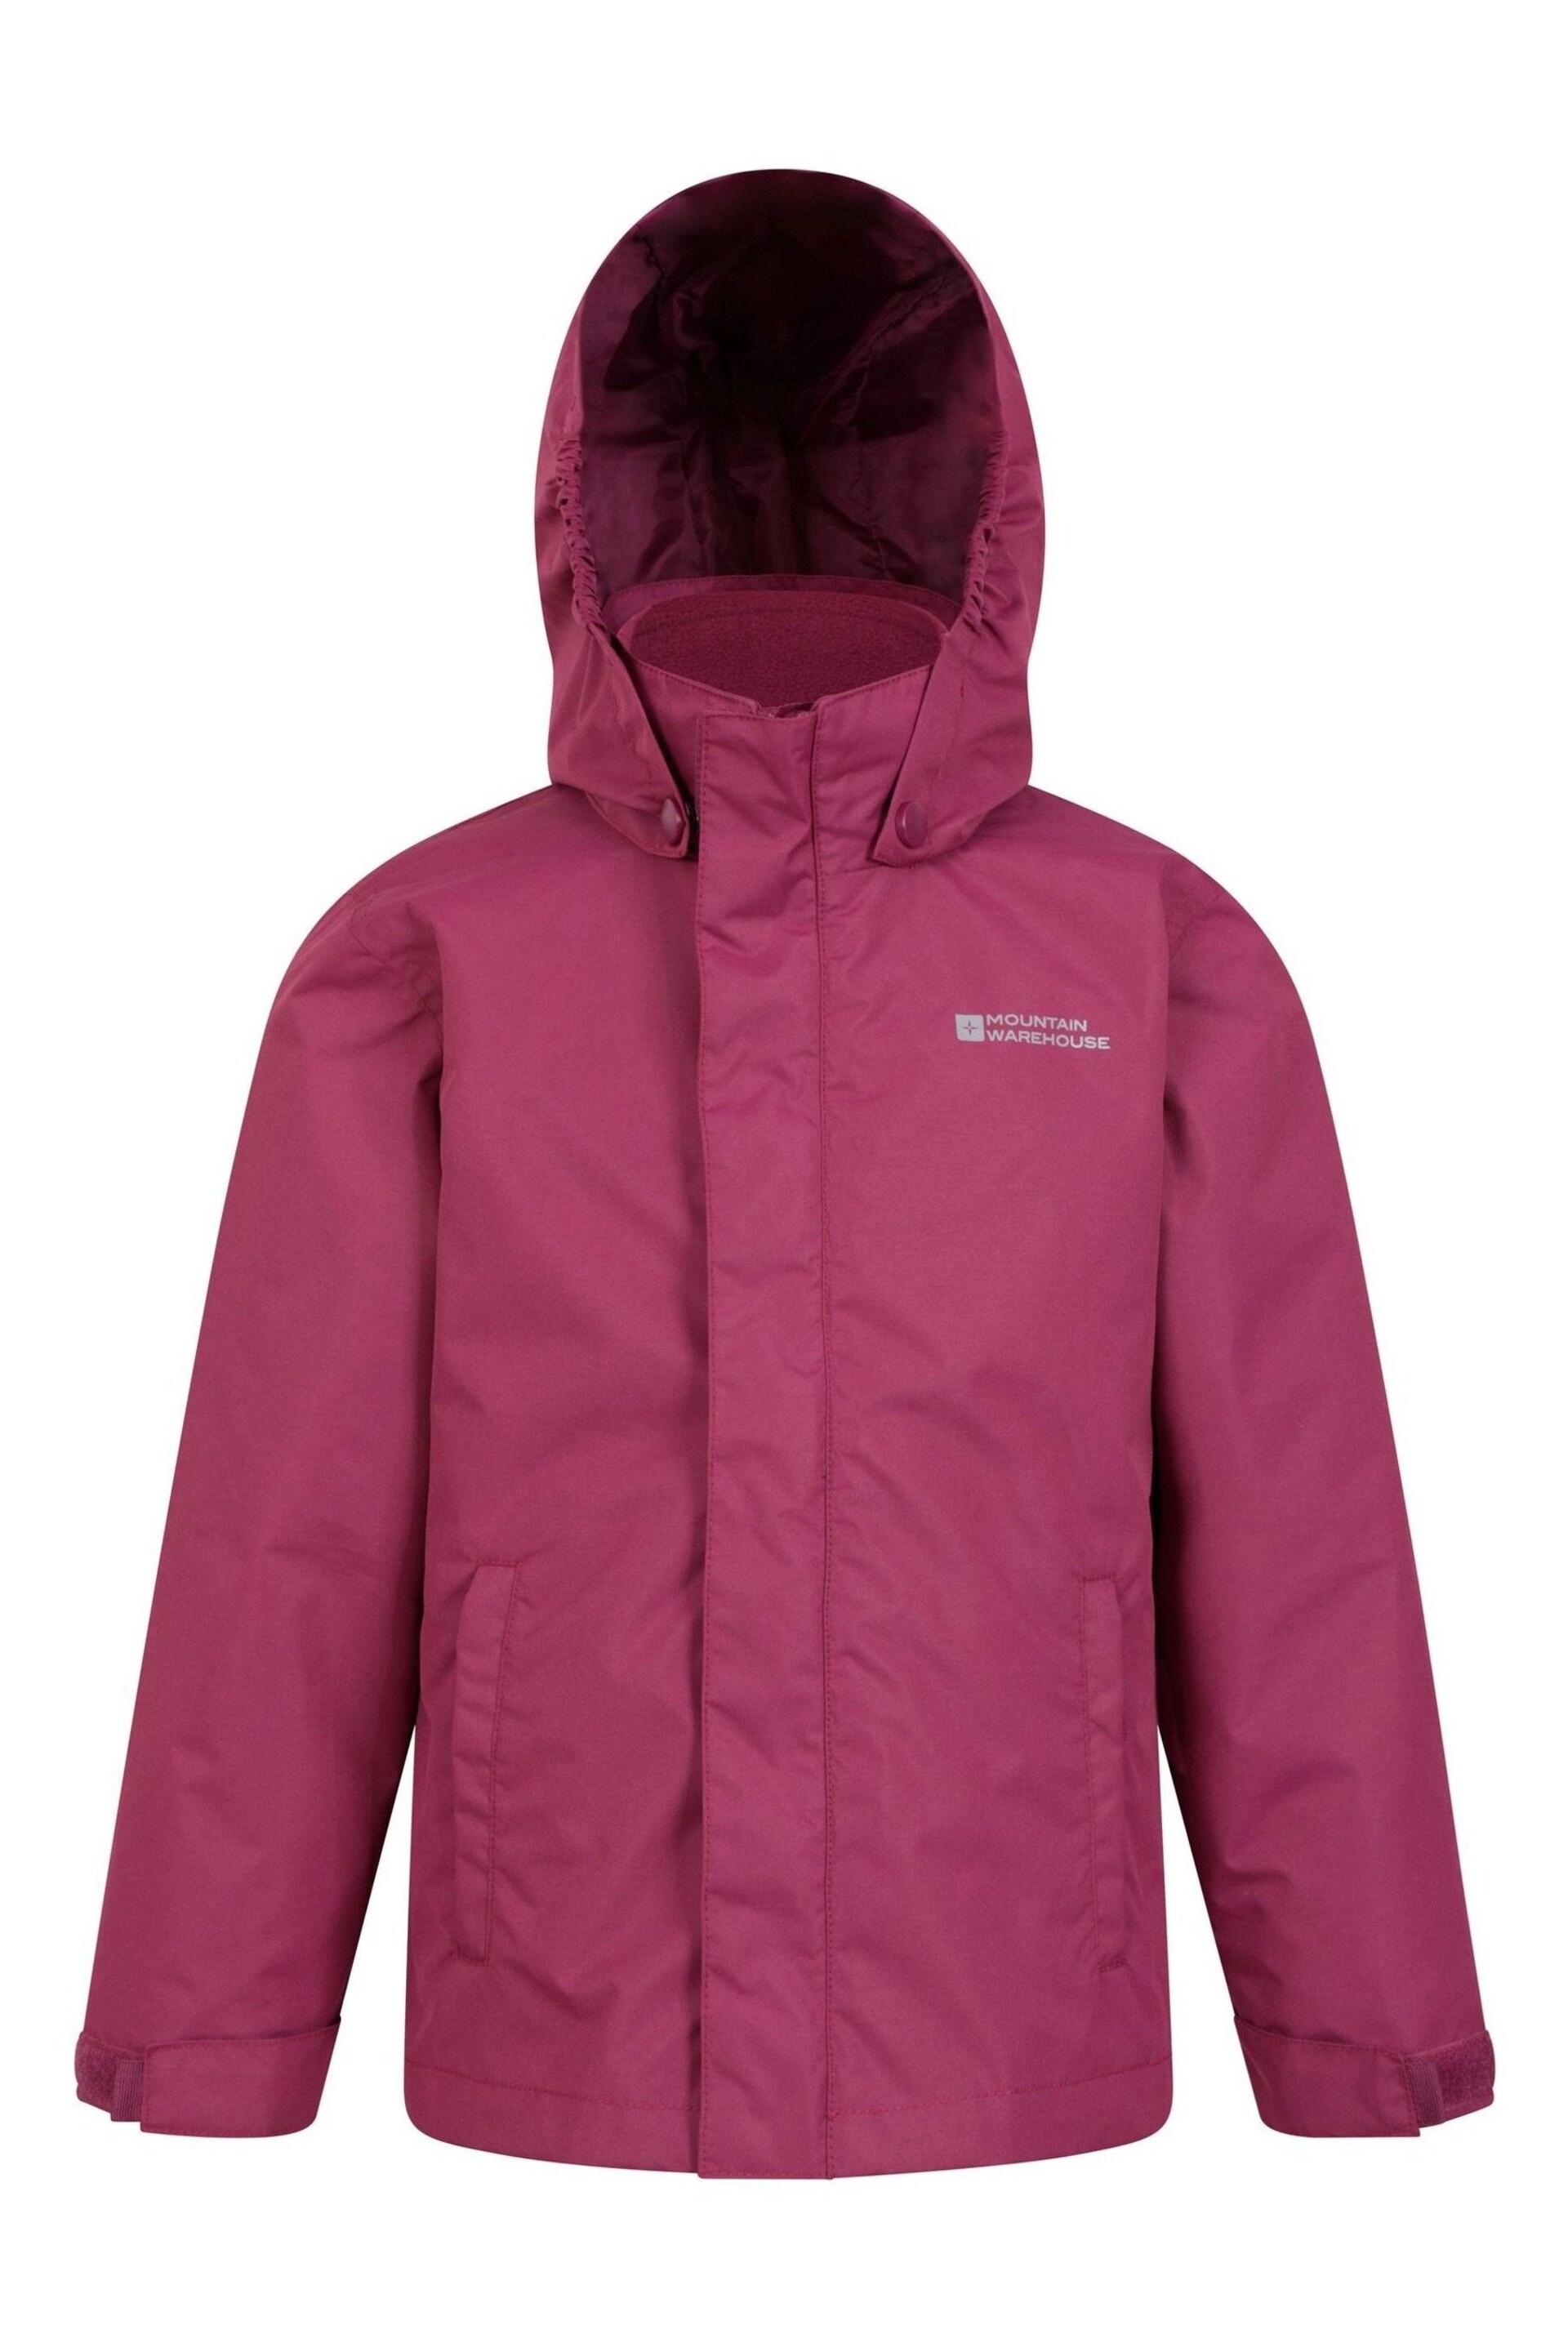 Mountain Warehouse Red Fell Kids 3 In 1 Water Resistant Jacket - Image 5 of 5